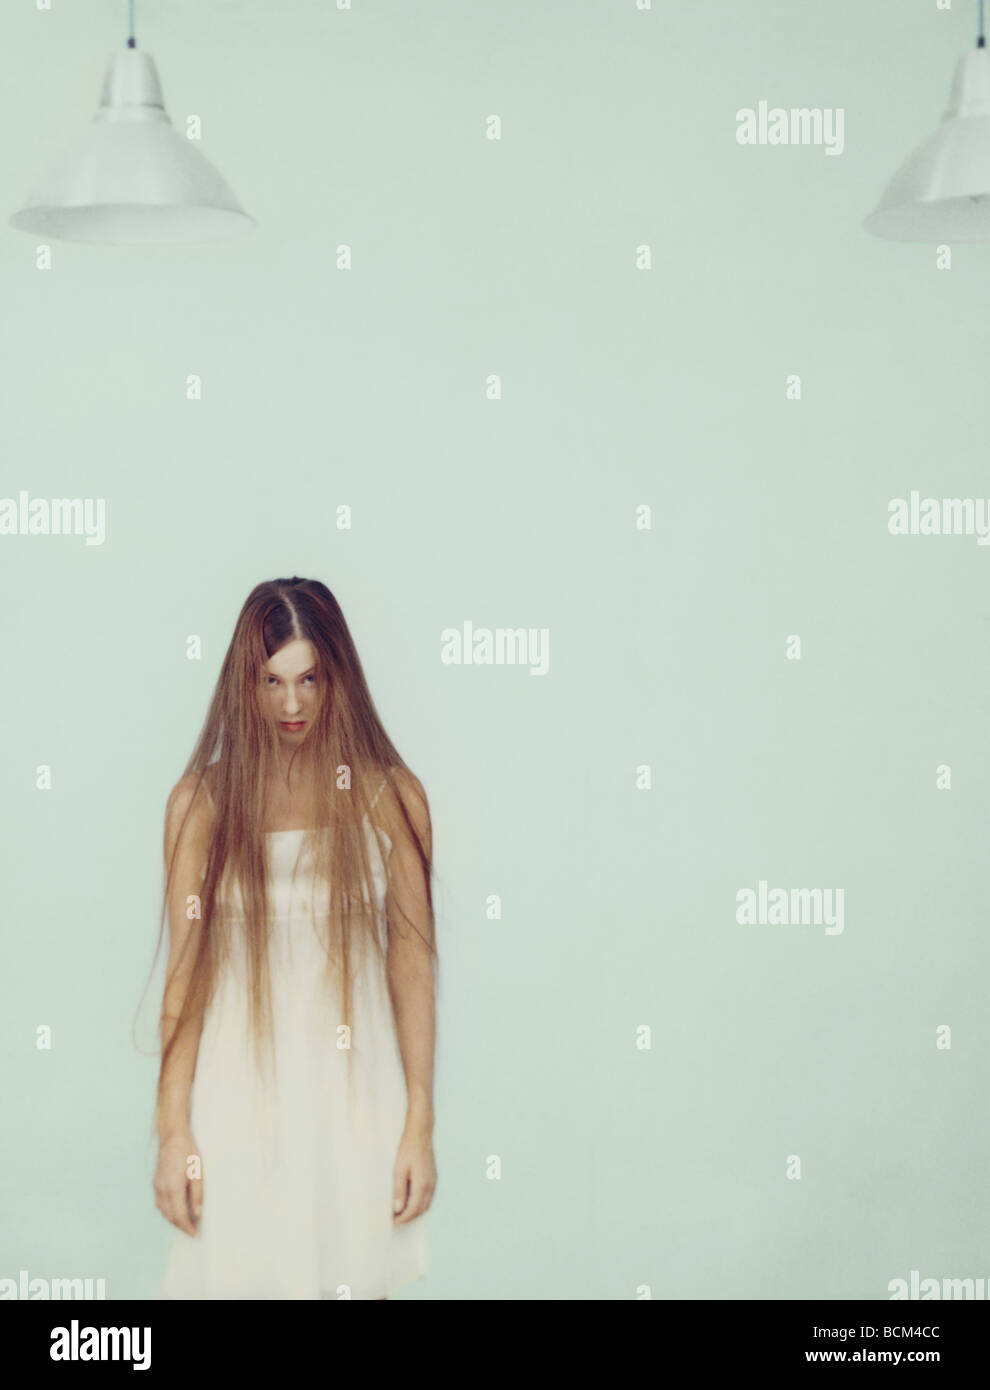 Young woman with messy long hair standing, looking at camera Stock Photo